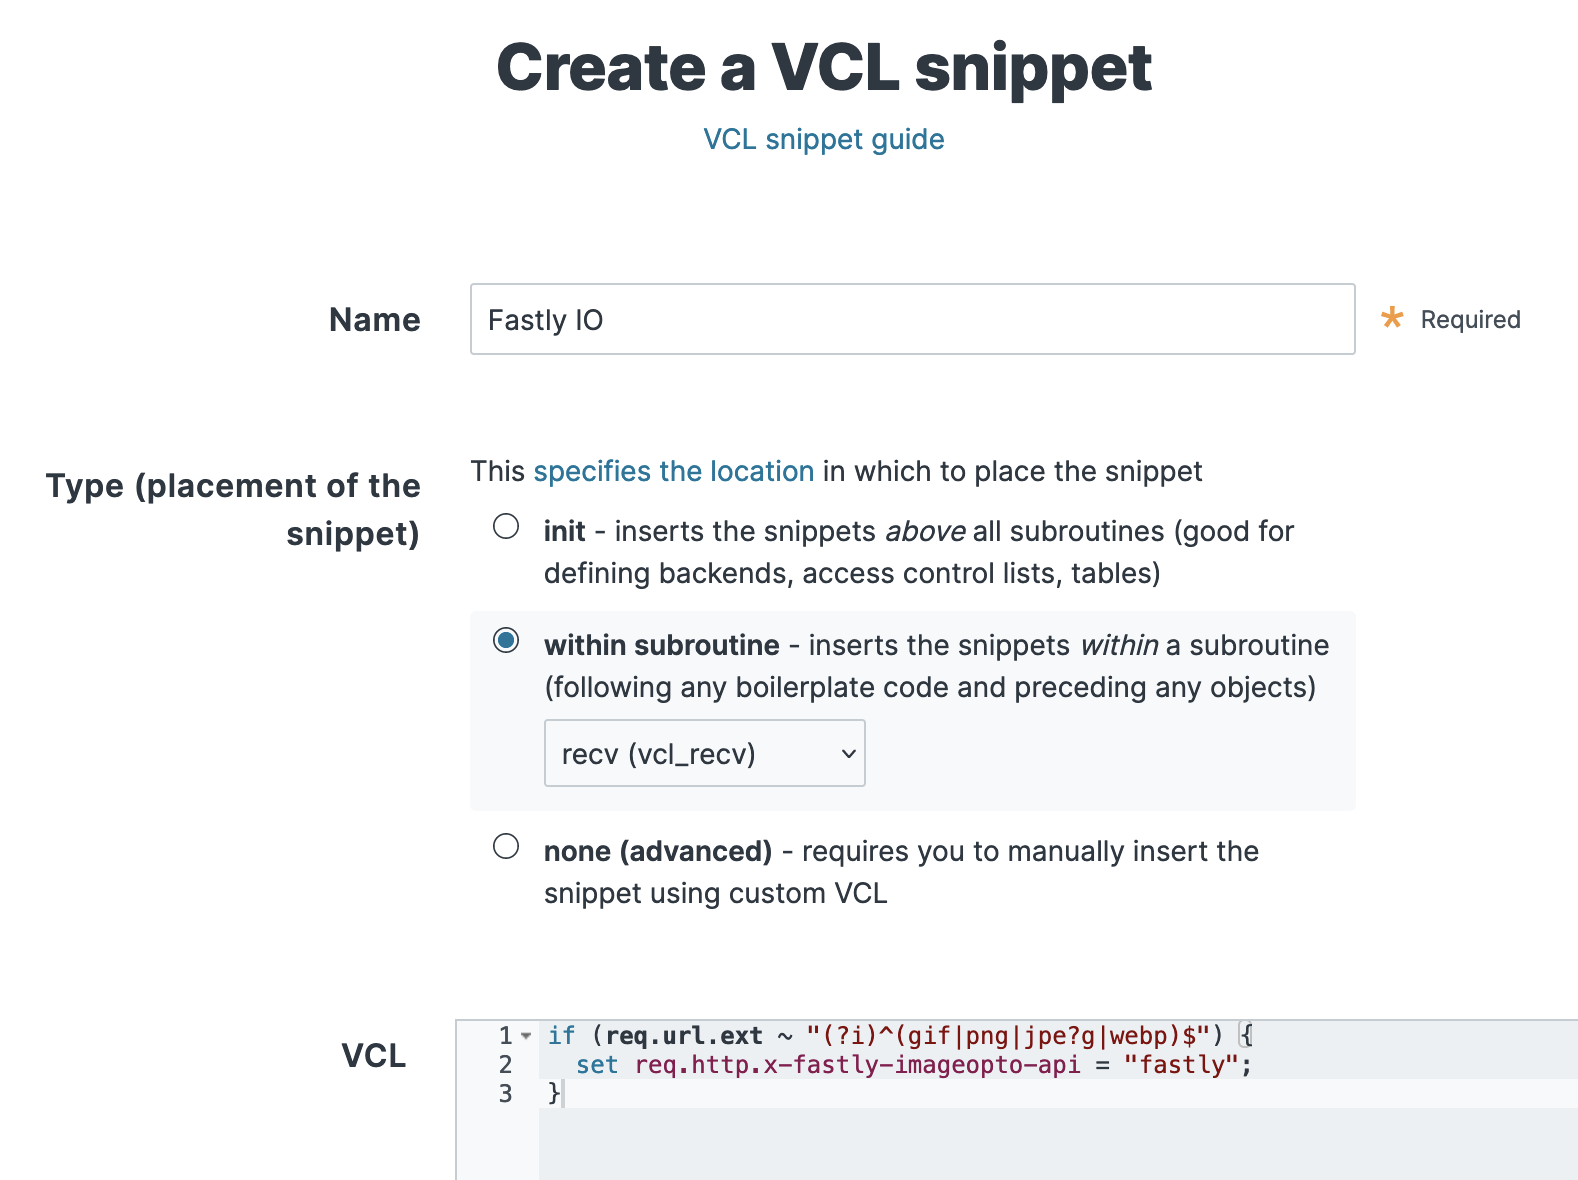 Creating a VCL snippet for Fastly IO